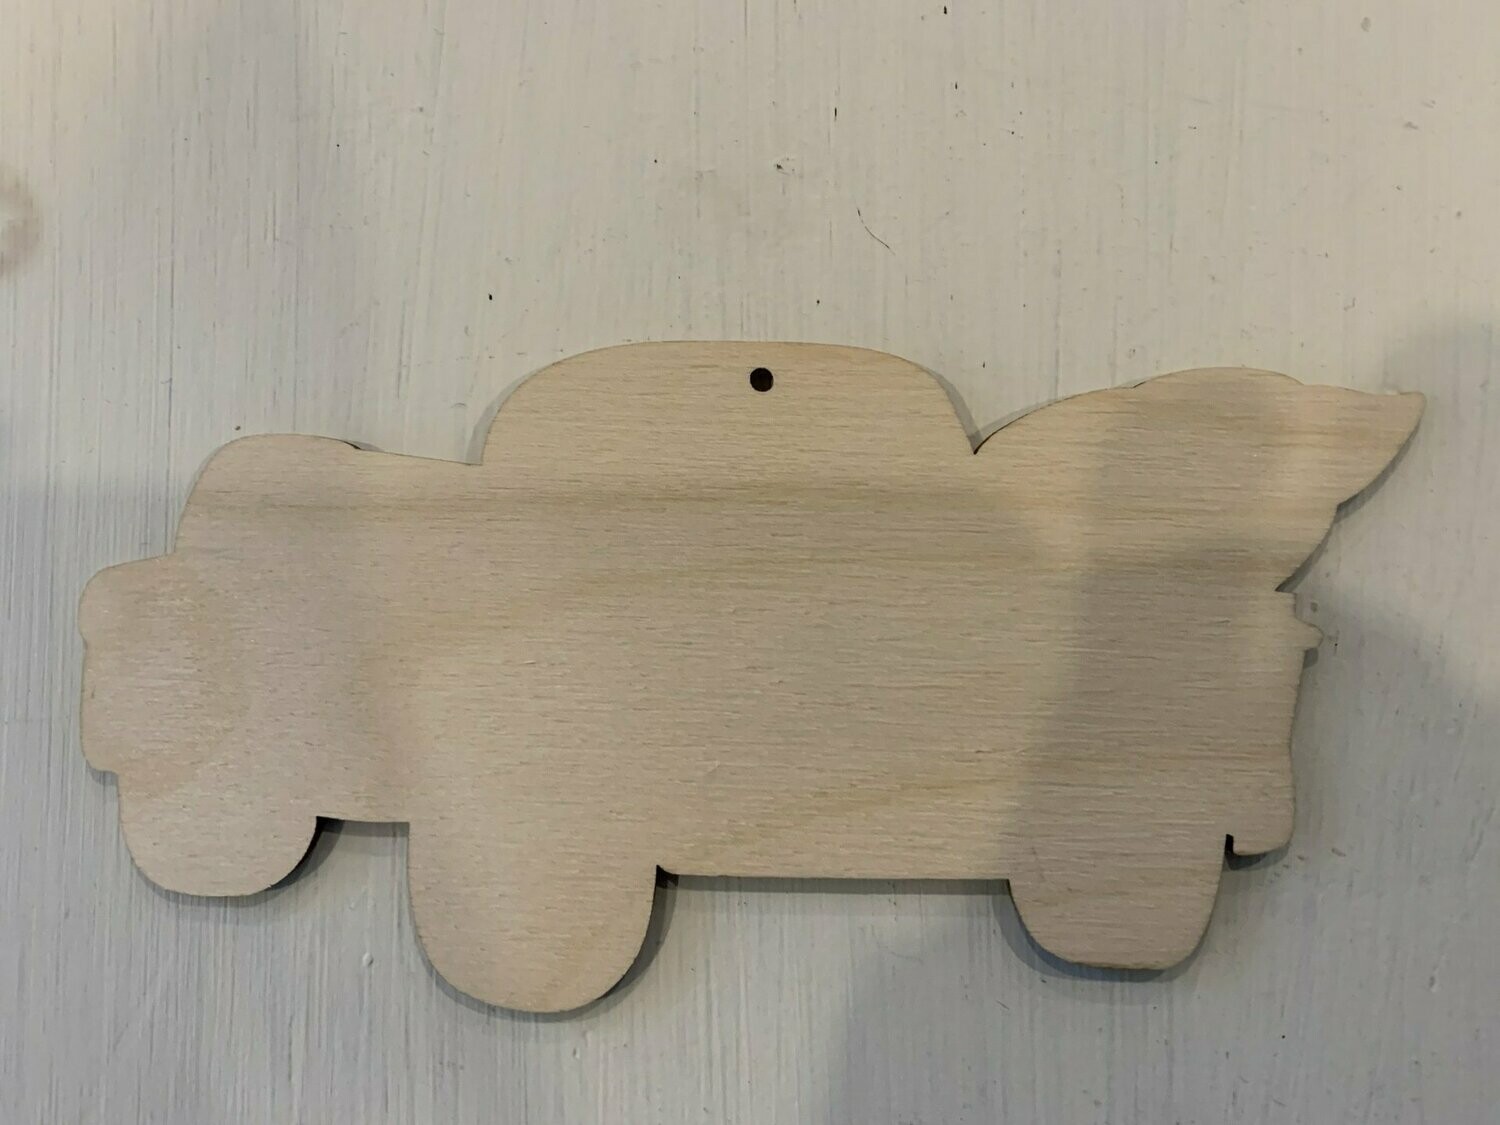 Wood cut out for Red Truck Ornament